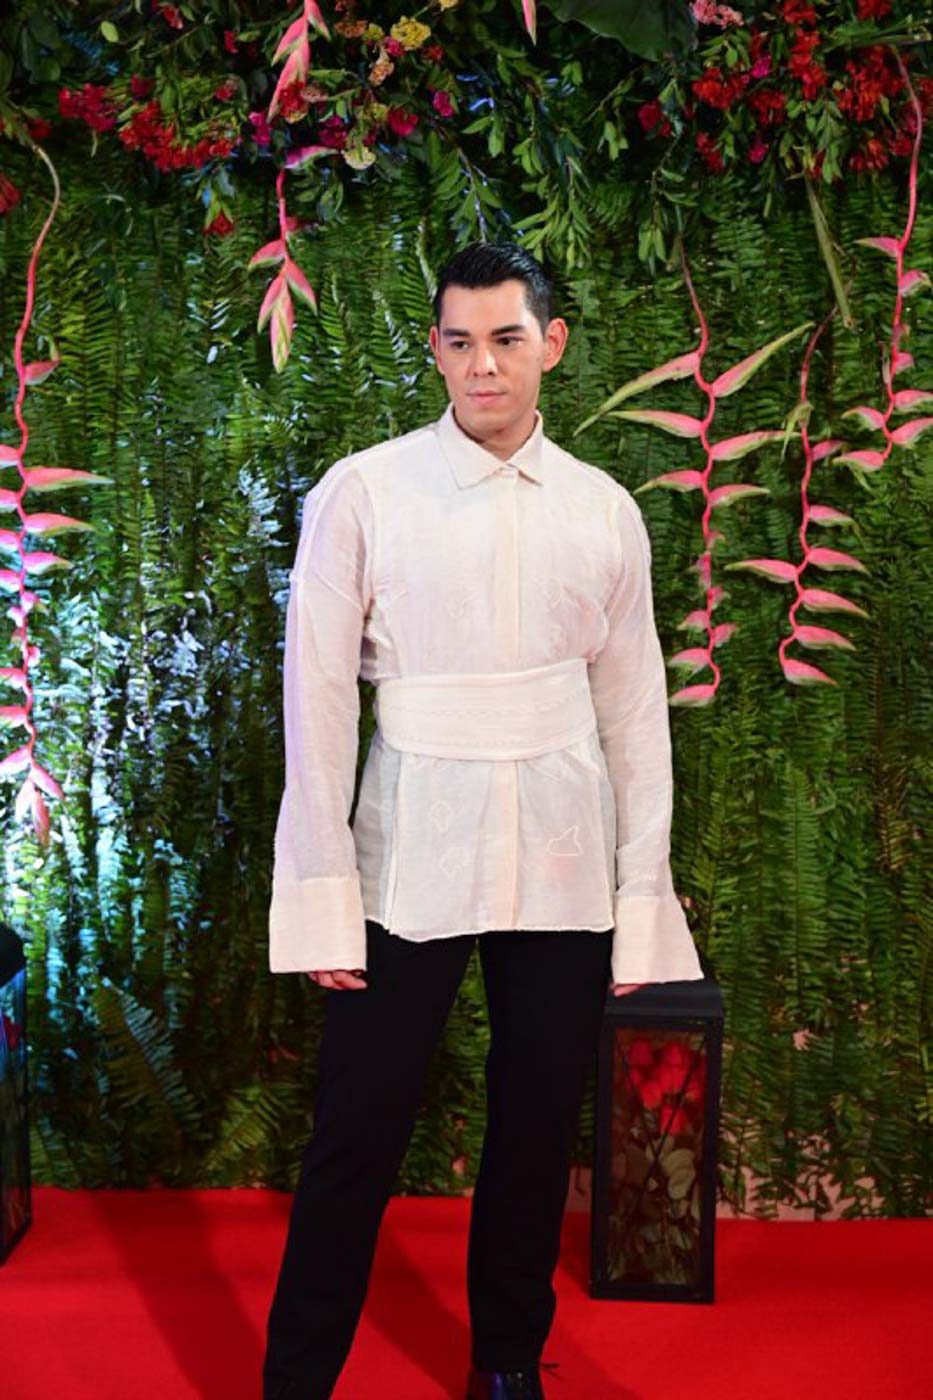 In Photos All The Looks At The Abs Cbn Ball 2019